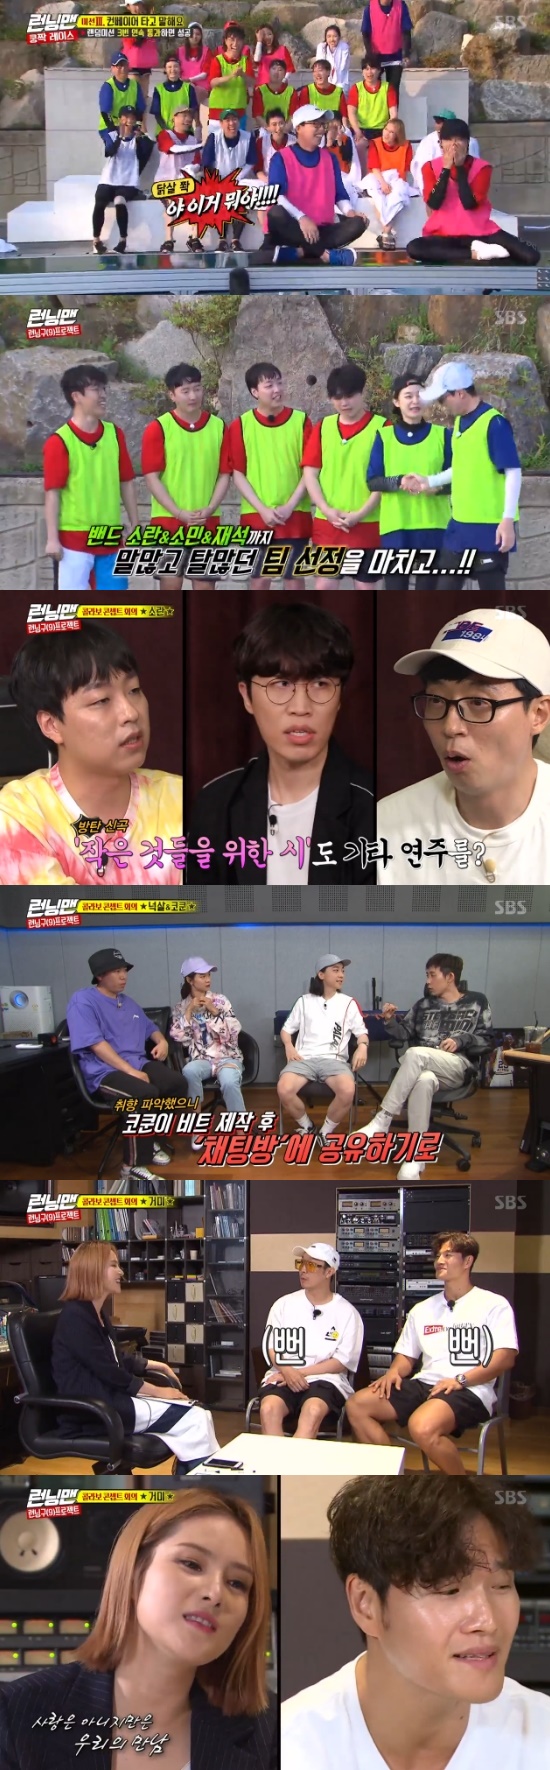 With the Running Man collaboration team confirmed, spiders and Kim Jong-kook raised expectations with instant Duets.On the 14th SBS Good Sunday - Running Man, Apink, Spider, Nuxal & Kord Kunst, and disturbance played a confrontation.The song was started on the day, with the score of 28 for the mission, which connects and sings each others bodies. The karaoke score of the Knocksall & Kokun team was 28 points.The karaoke score for the fuss team was 53 points; there was no deduction.The spiders score was 84; but the spider was still holding hands, so it was down 60 points, and eventually got 24.Lee Kwang-soo and Kim Jong-kook said, We kept shouting behind the scenes when the spider said Lets talk.The Apink teams selection was Tears by So Chan-hui, Jung Eun-jis cool high note scored 98; he scored 30 deductibles, but was first with 68.Ji Suk-jin shouted, Do not forget me.Jung Eun-ji, who picked up another card, said, There is one person who feels like he should not be there. He sent Haha and brought Lee Kwang-soo.The lantern warns the delighted Haha, If you like it, you will bring it back later.The disturbance team heard Yang Se-chan alone change one person, replaced Ji Suk-jin and team, and entered the Nuksal & Cocoon team.If you only go in the spider team, its a grand slam, Ji Suk-jin said.The team of Yang Se-chan, who recruited Yang Se-chan, laughed, saying, It seems like the first game now.I didnt know Kokoun was such a playful person, said Yang Se-chan, who said Kokoun actually was joking before, and (Ji Suk-jin) told me to stay still.The third mission was Tell me on the conveyor and was given four random Game on the conveyor belt; the first challenge was Yang Se-chan and Cocoon of the Noxal & Cocoon team.The pair were outspoken through the third round, but were eliminated in the fourth.Next up is the Apink teams lantern, Namju; the lantern still didnt know the rules, and Yoo Jae-Suk laughed, saying, I like to go out without knowing the rules.Lee Kwang-soo and Son Na-eun, who were dispatched after the failure of the two, showed their willingness to I have a place to go back, but failed because of difficult problems.When Yoo Jae-Suk and Eunji were scooped up, the members praised it as Adlib Emperor because Yoo Jae-Suk had given the members a pinjack saying they couldnt keep adlibing.Yoo Jae-Suk said, I will show you as if you are playing with a beat. However, he showed a embarrassed three-way poem and laughed.The Nooksal & Cocoon team, which won the last mission, kept the team, and the second-placed fuss team sent Ji Suk-jin out and brought Yoo Jae-Suk.A week later, each team met to discuss the concept.Yoo Jae-Suk, who went to the disturbance team at the last minute, grumbled and said that Lee Tae-wook played guitar in the BTS FAKE LOVE and Poetry for Small Things.But Yoo Jae-Suk laughed, saying, I think the fuss with the people really fits well, but I do not fit.Song Ji-hyo and Yang Se-chan showed rap in front of Noxal & Kord Kunst.Haha ventured to shame and seriously sang ballads in front of Kim Jong-kook, spiders, while Kim Jong-kook and spiders instantly matched the Duets.Photo = SBS Broadcasting Screen